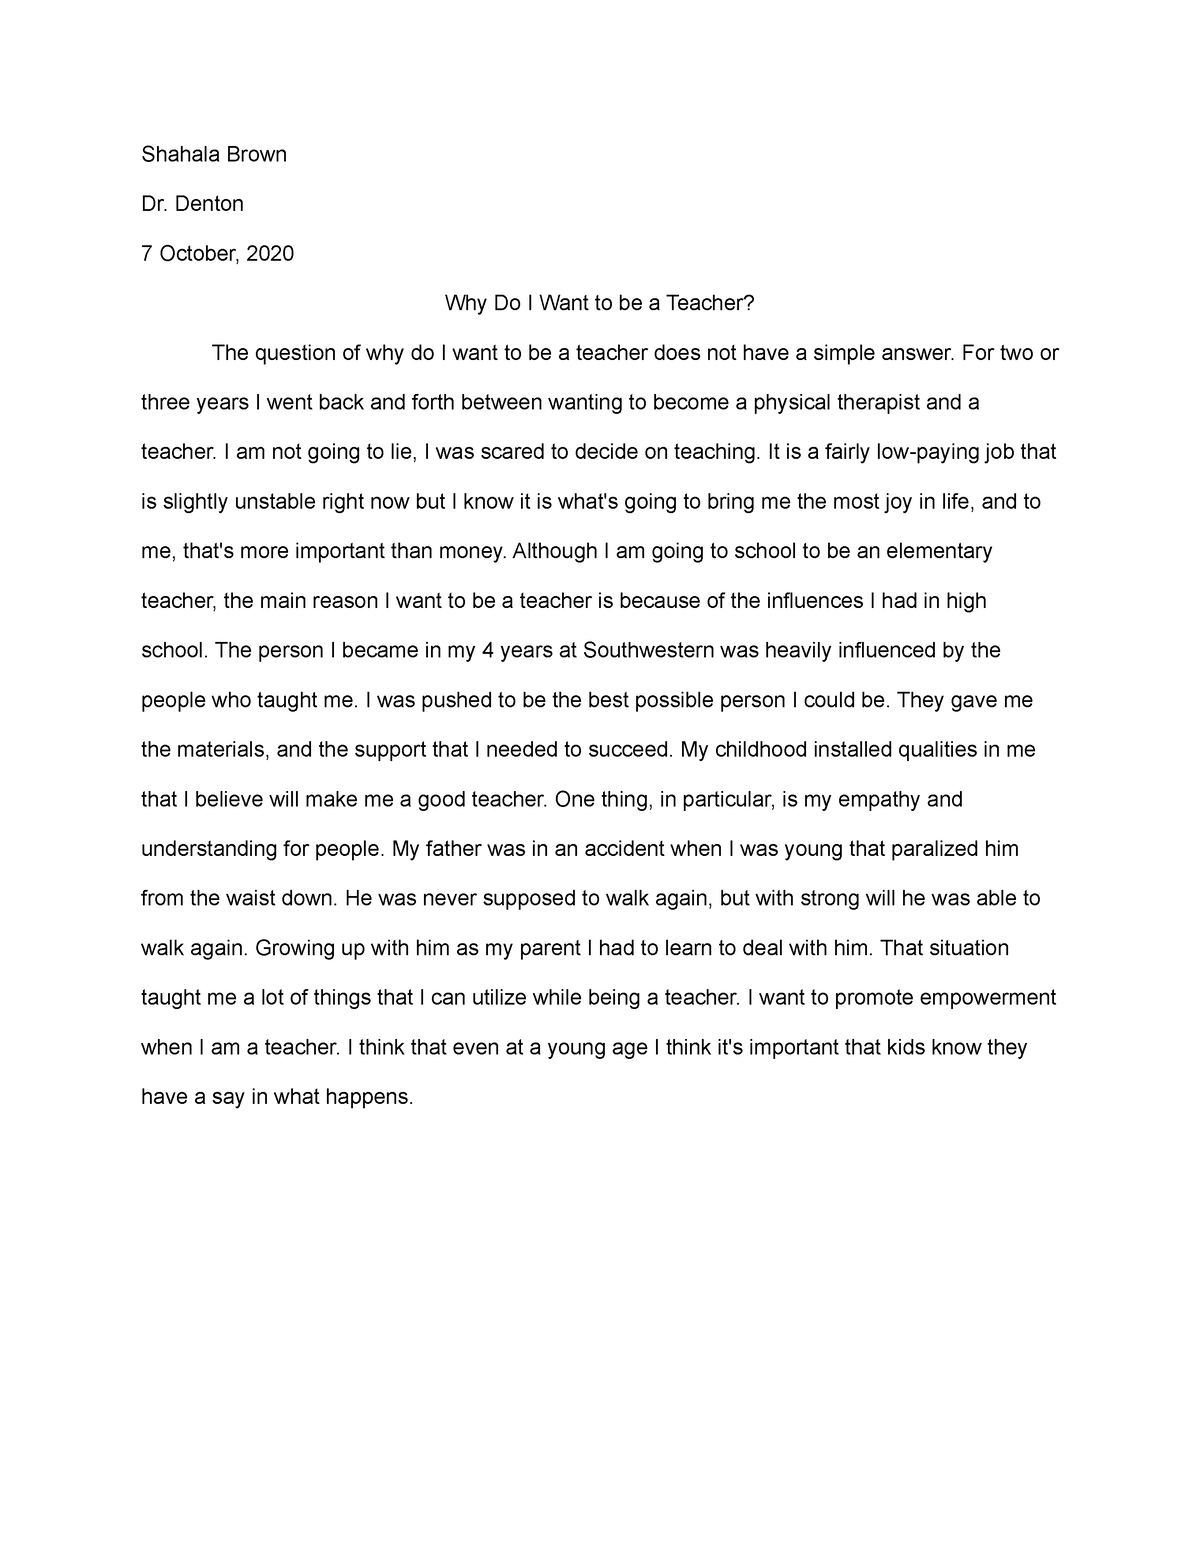 why i want to be a teacher essay pdf